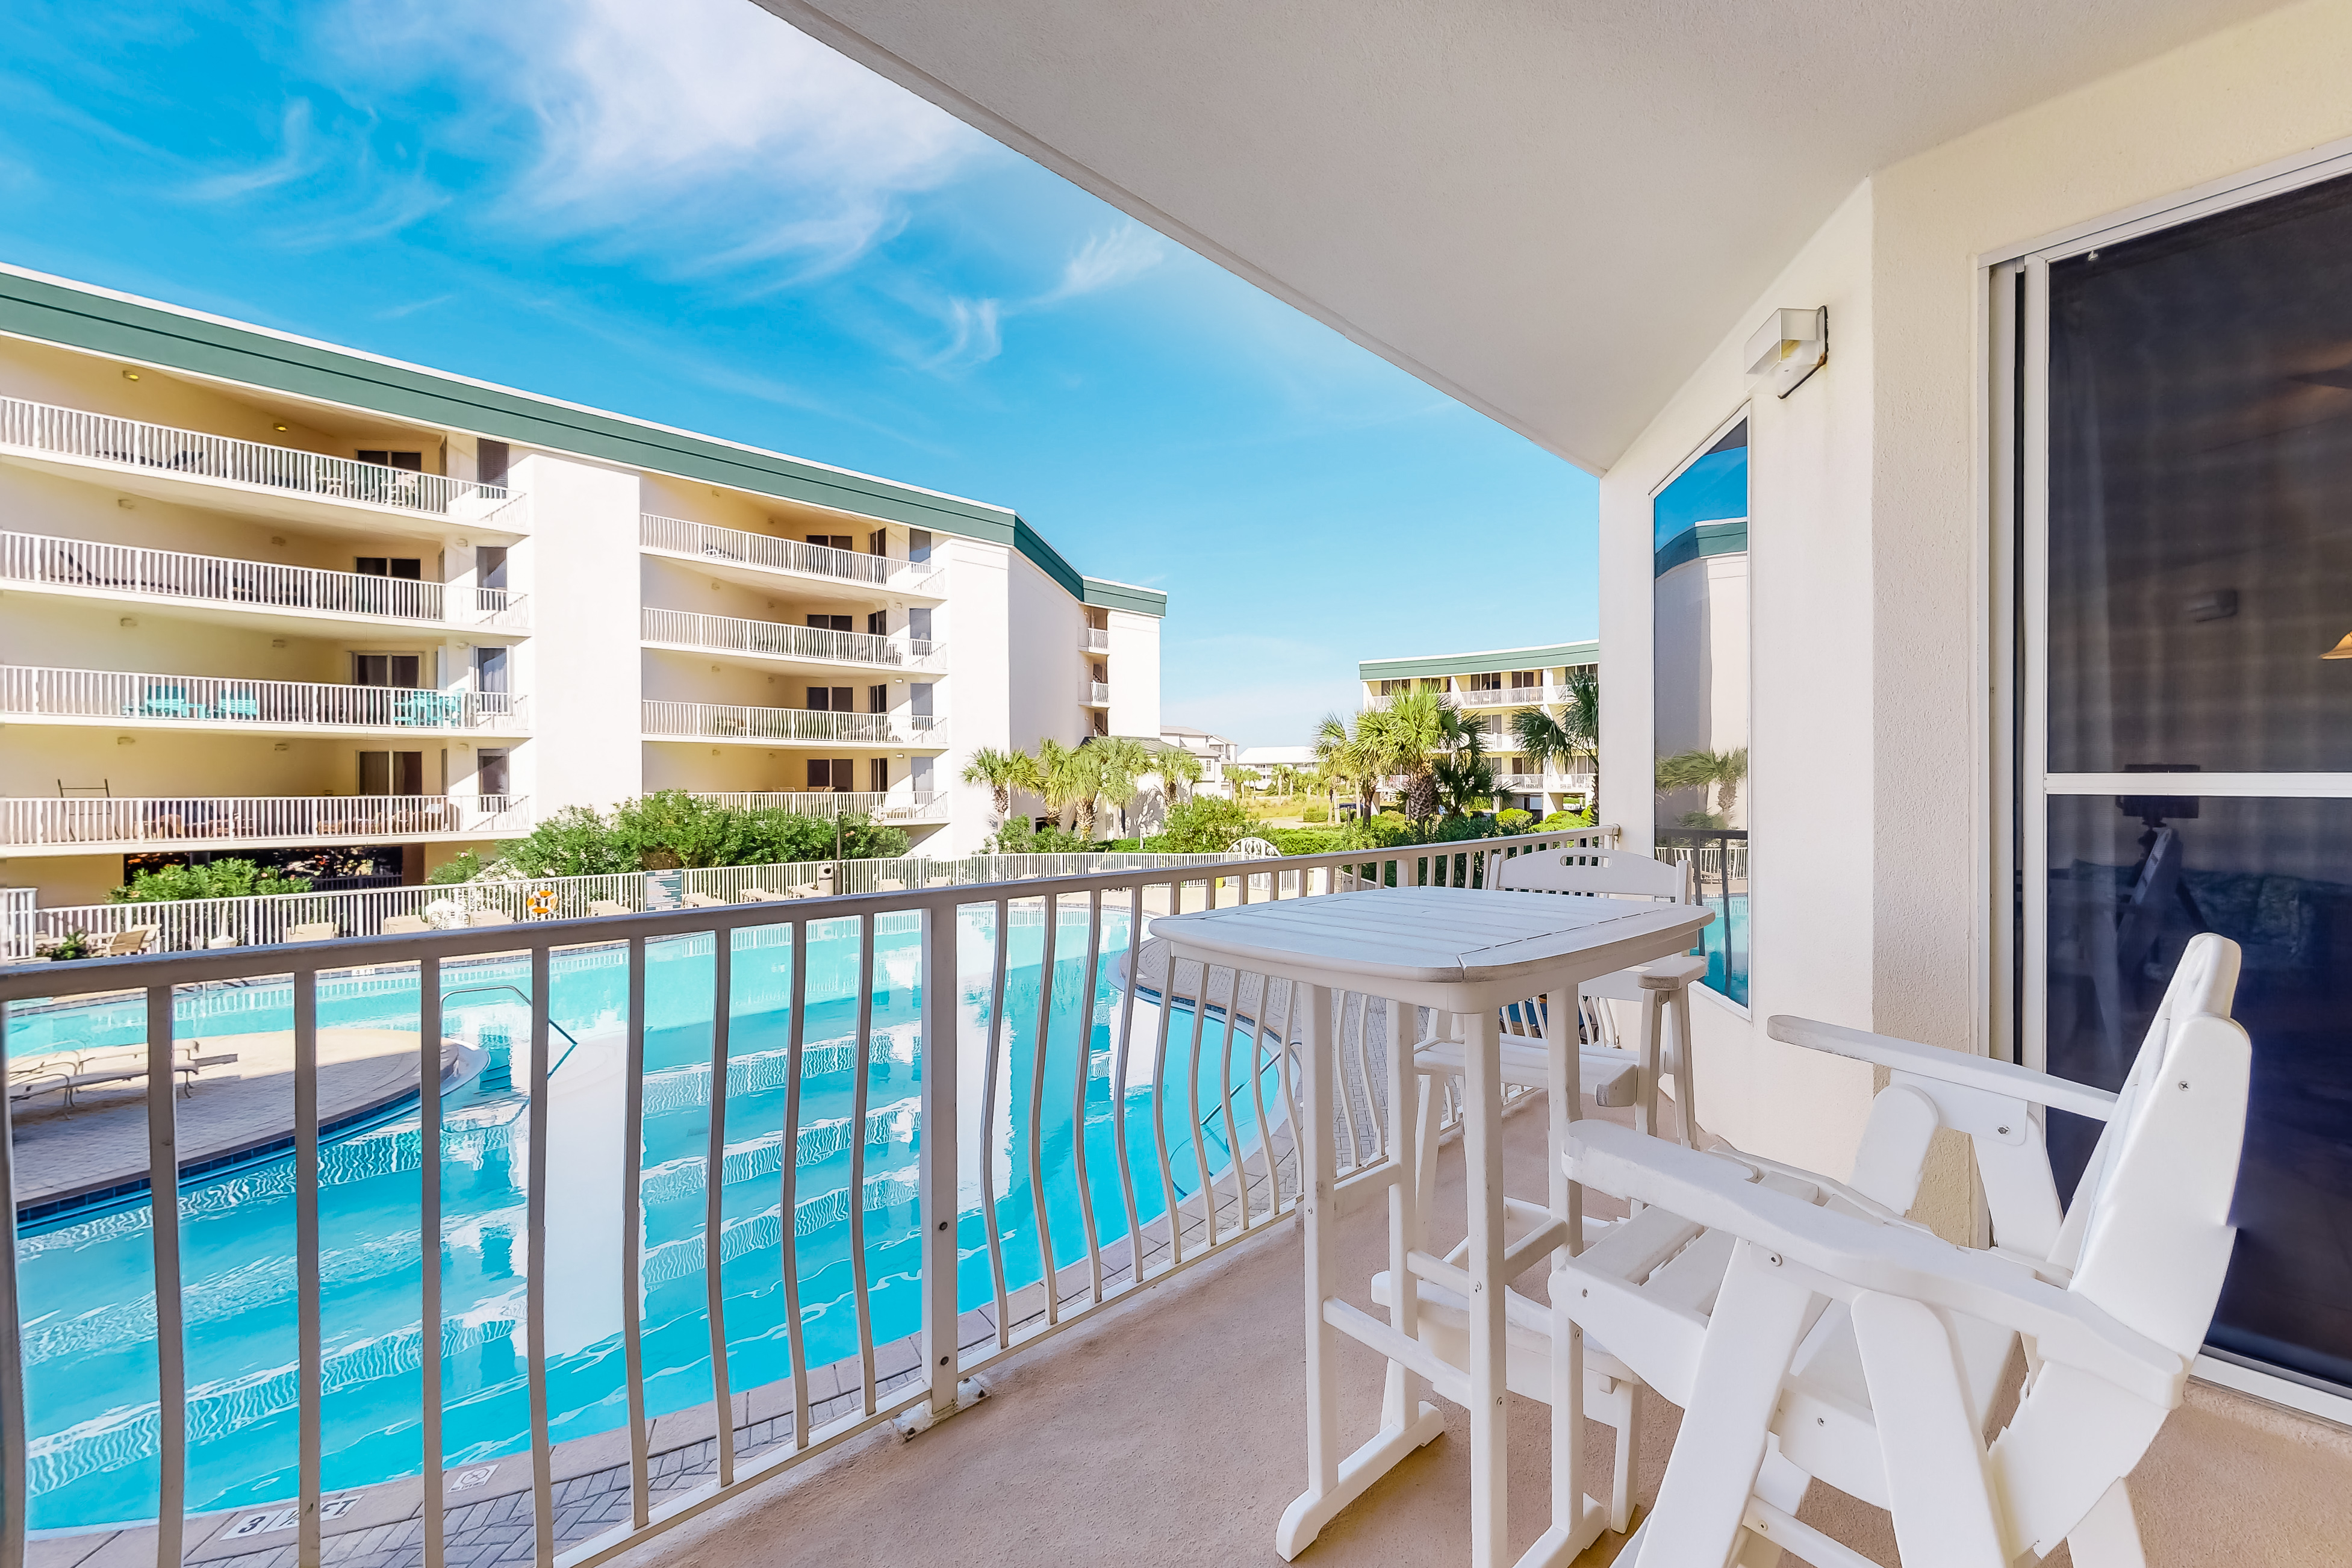 Dunes of Seagrove A104 Condo rental in Dunes of Seagrove in Highway 30-A Florida - #1